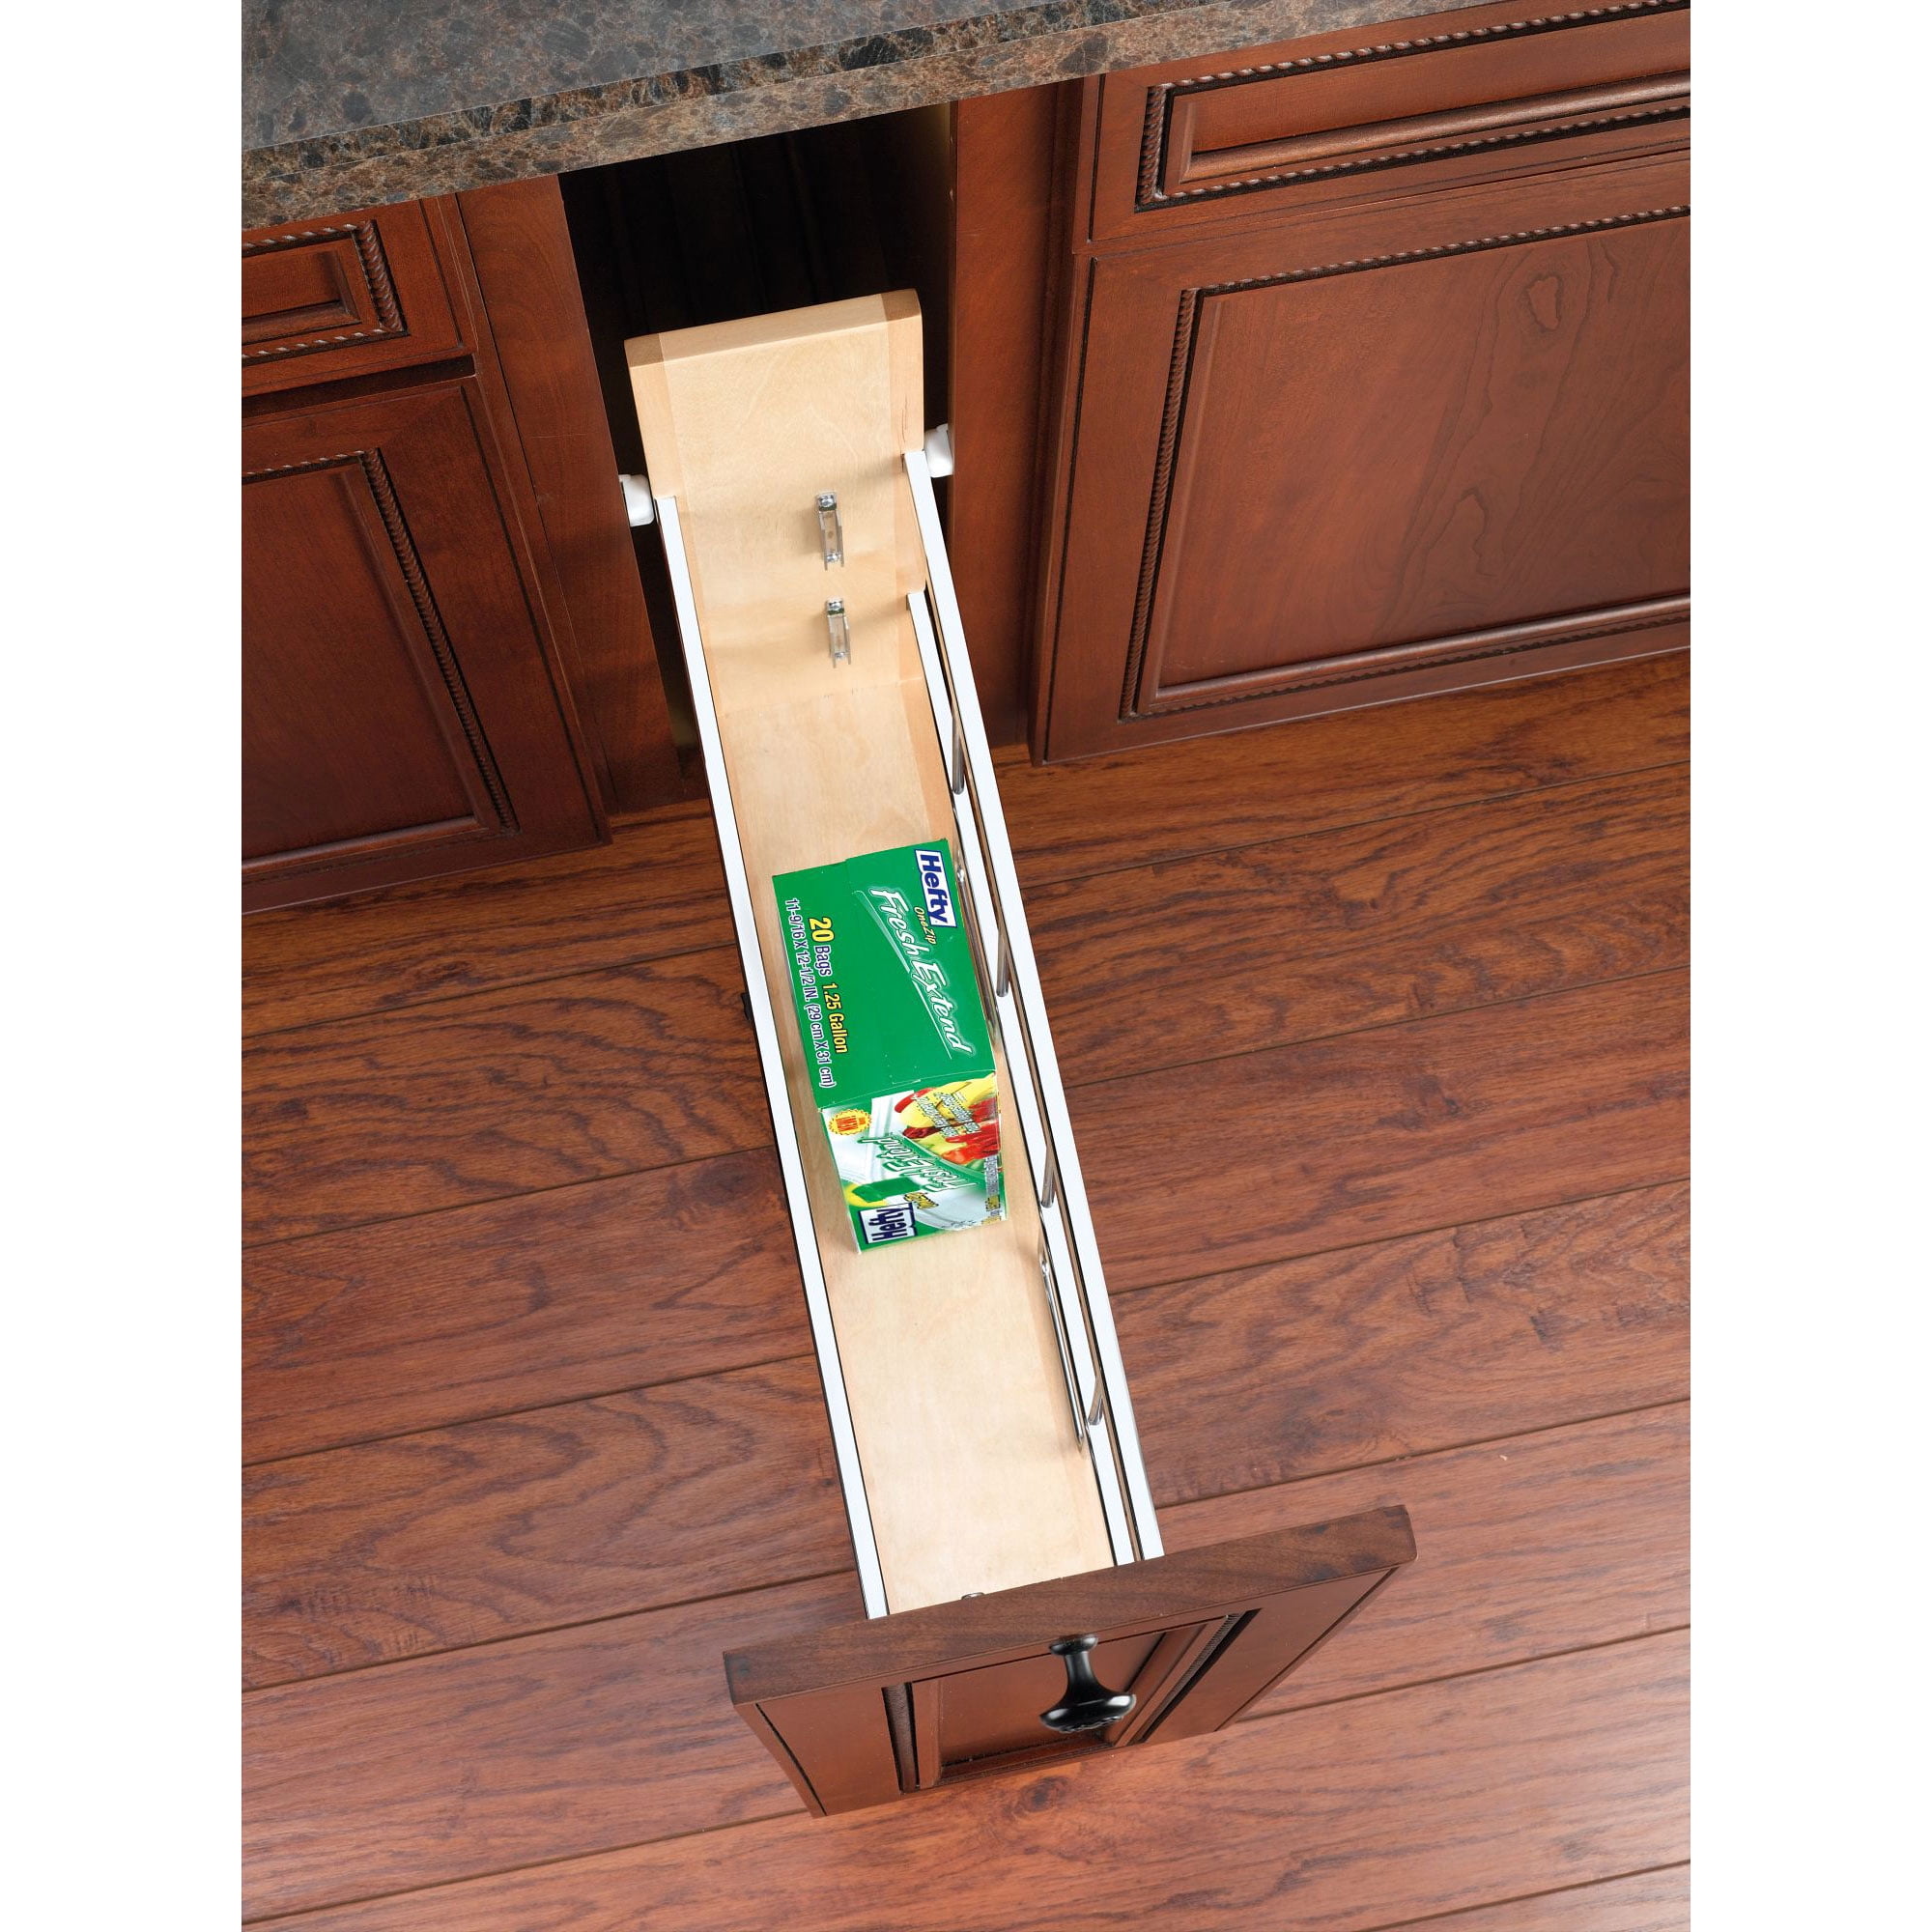 Rev-A-Shelf 8 Inch Width Wood Pull-Out Organizer with Adjustable Shelves  for Kitchen Base Cabinet, Natural, Min. Cabinet Opening: 8-1/2 W x 22-1/2  D x 25-5/8 H 448-BC-8C